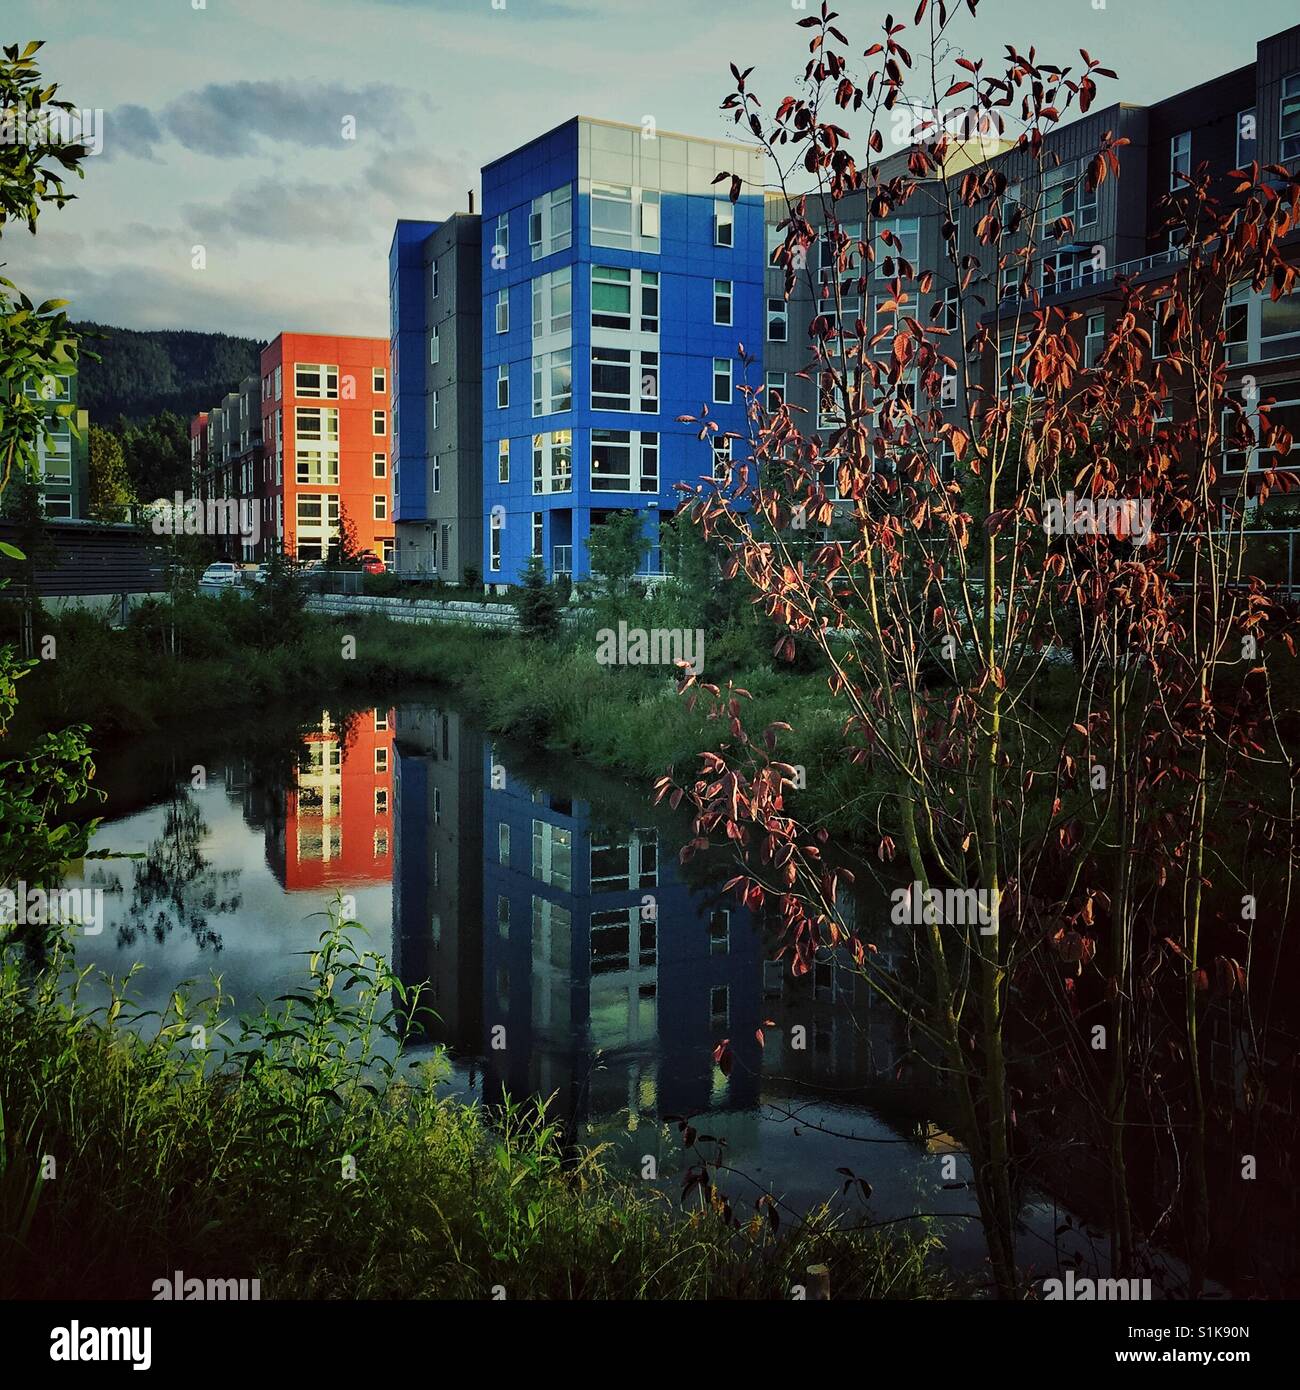 New modern colorful apartment buildings reflect in storm pond in Issaquah, WA Stock Photo